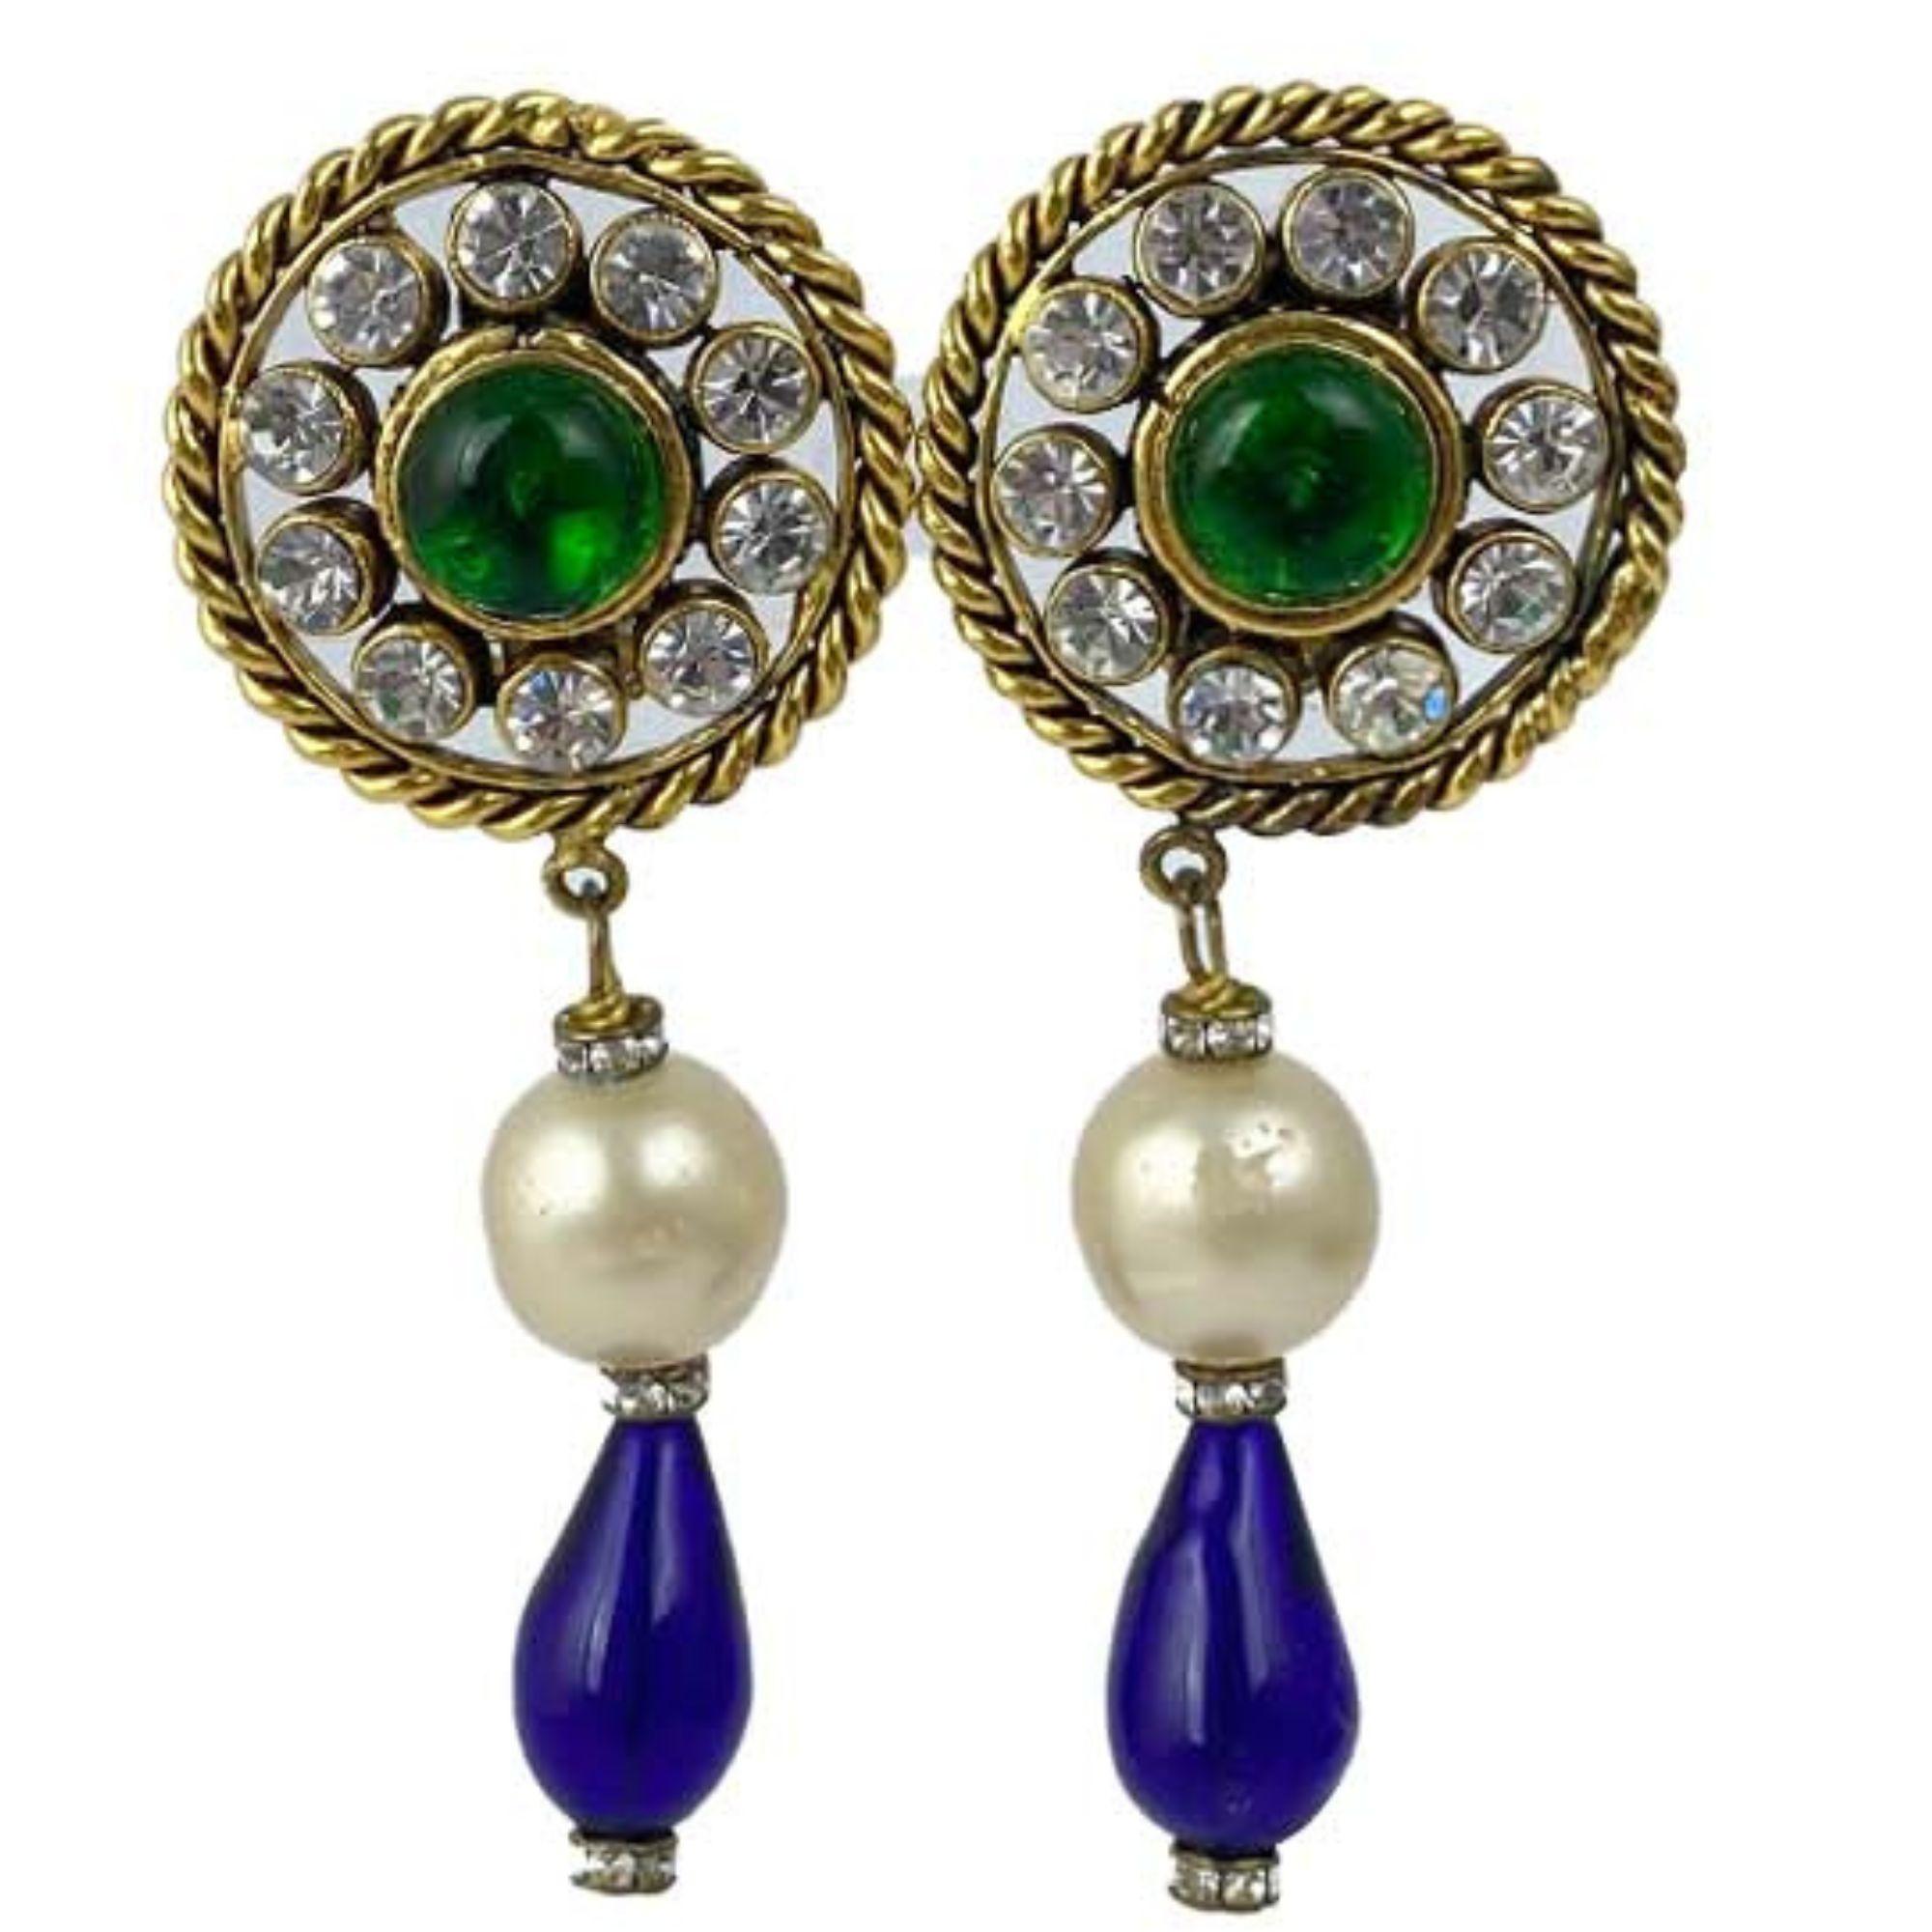 Vintage Chanel GOLD/BLUE/GREEN 1986 Gripoix LG clip on dangle earrings featuring emerald green gripoix glass domed cabochon surrounded by 10 sparkling clear crystals. In great condition with minimal signs of wear and repairs have been made to one of